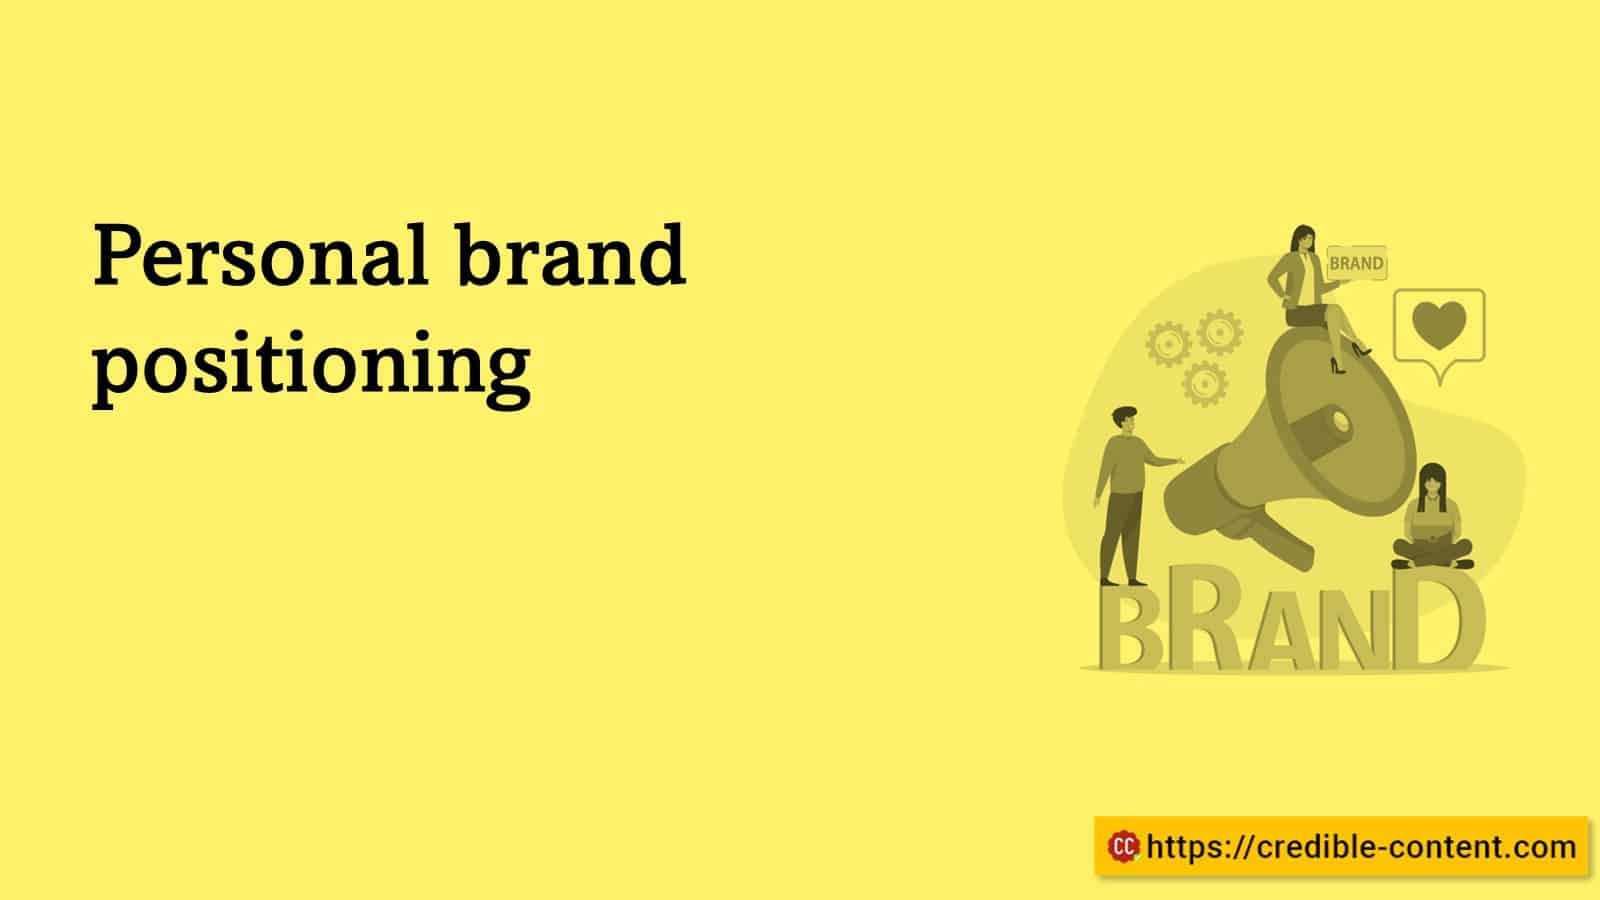 Personal brand positioning